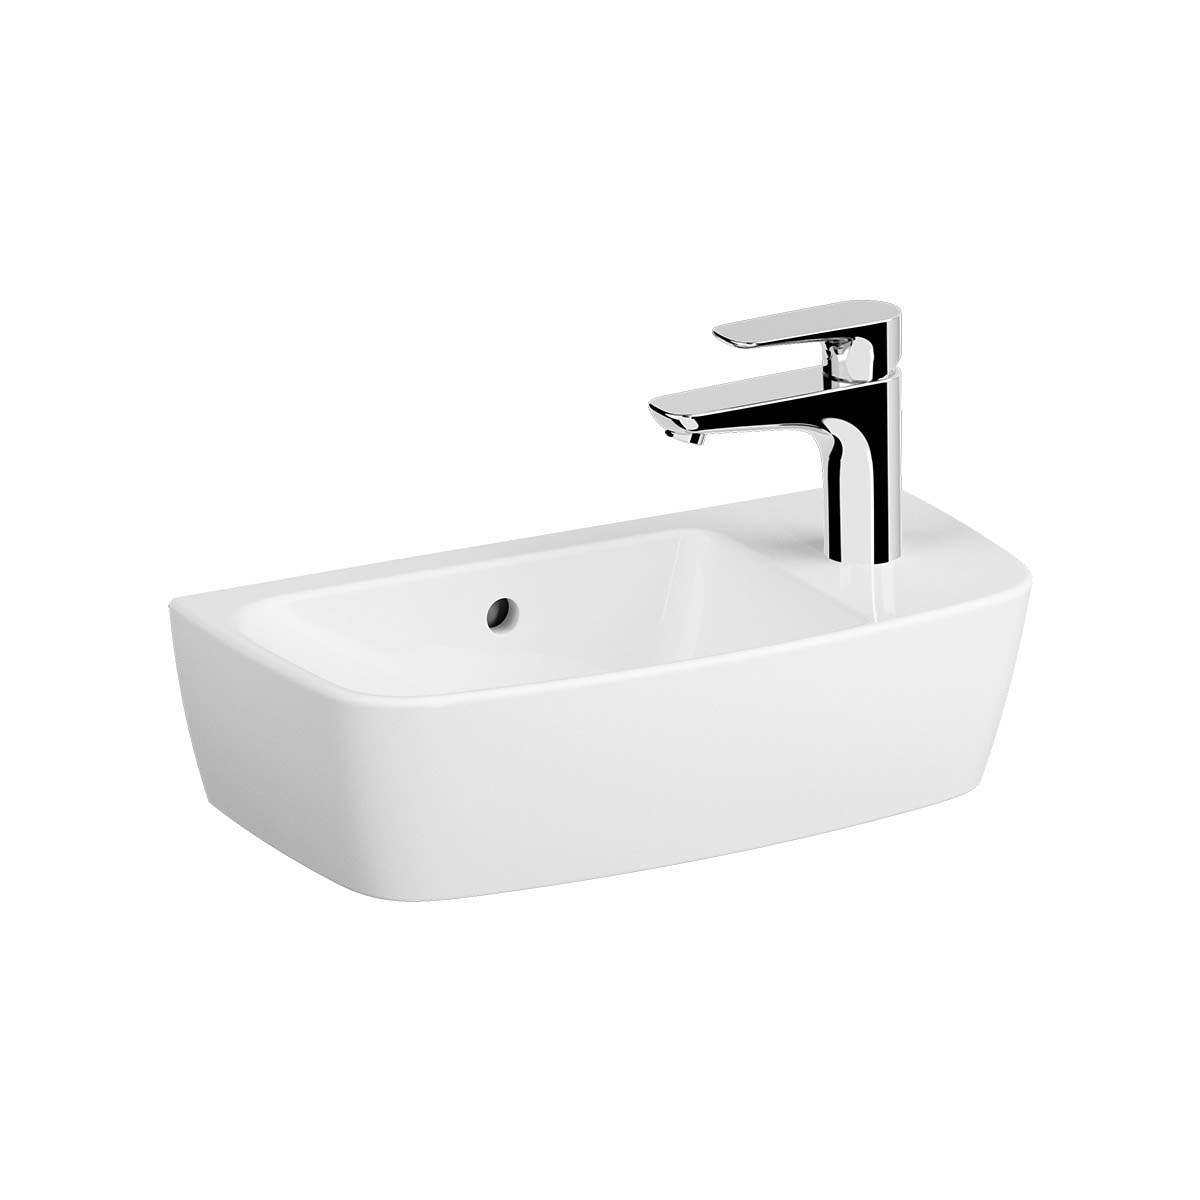 Compact Basin, 50X25 cm, One Tap Hole On Right, With Overflow Hole